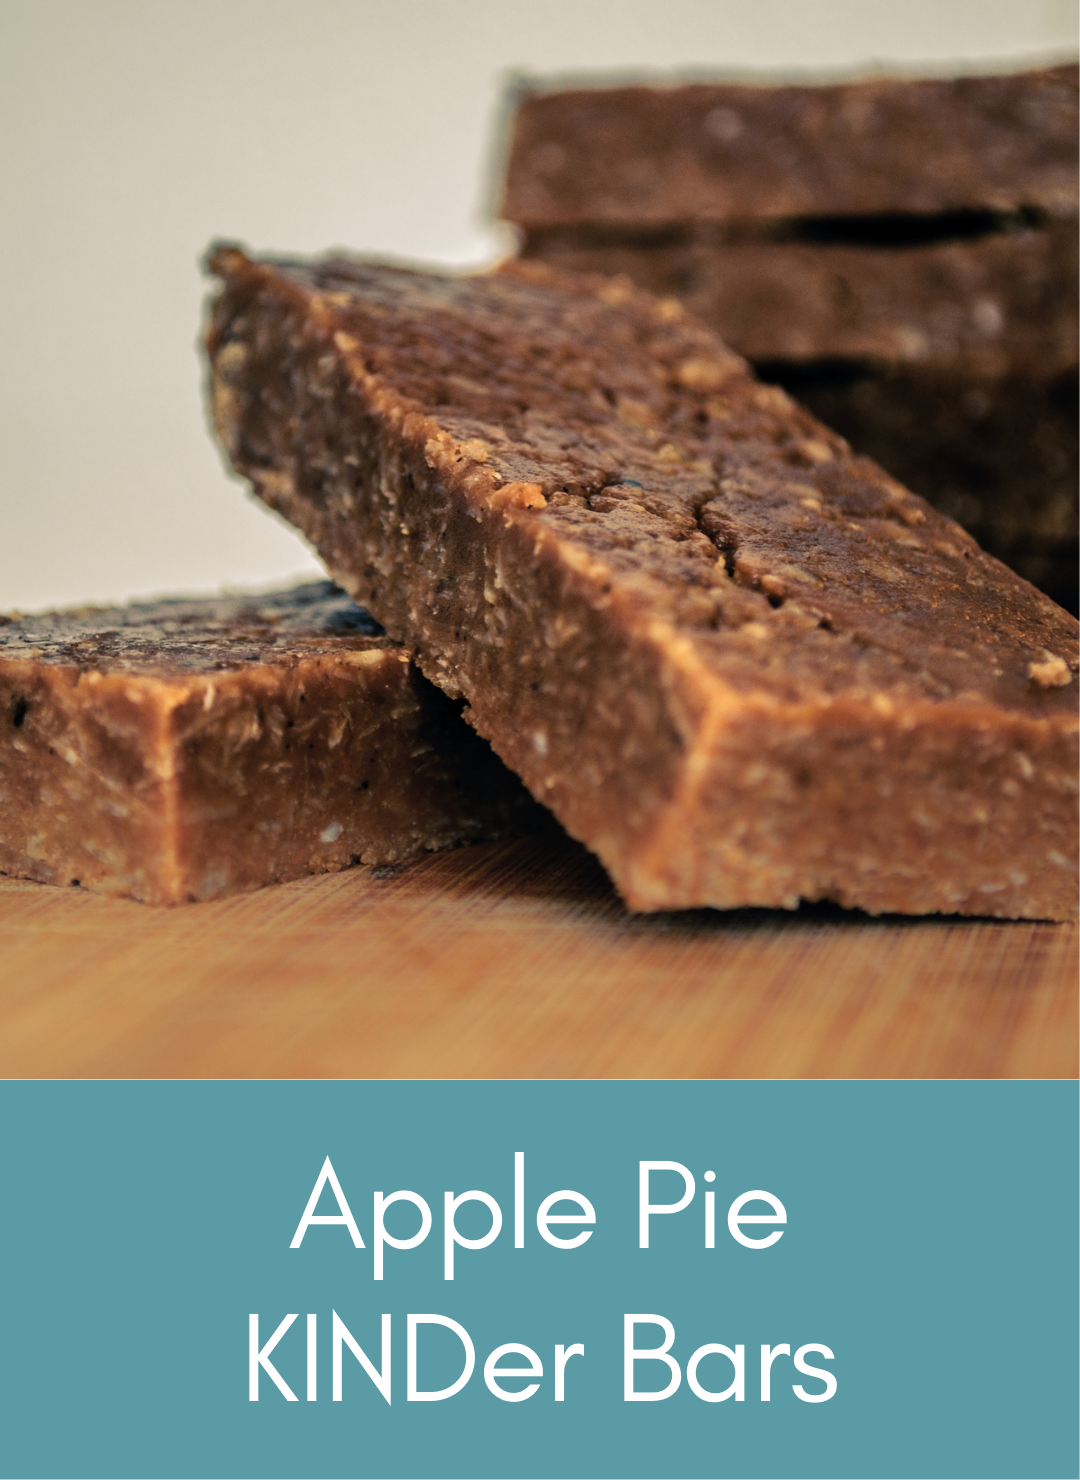 whole food plant based Apple pie KINDer bars Picture with link to recipe